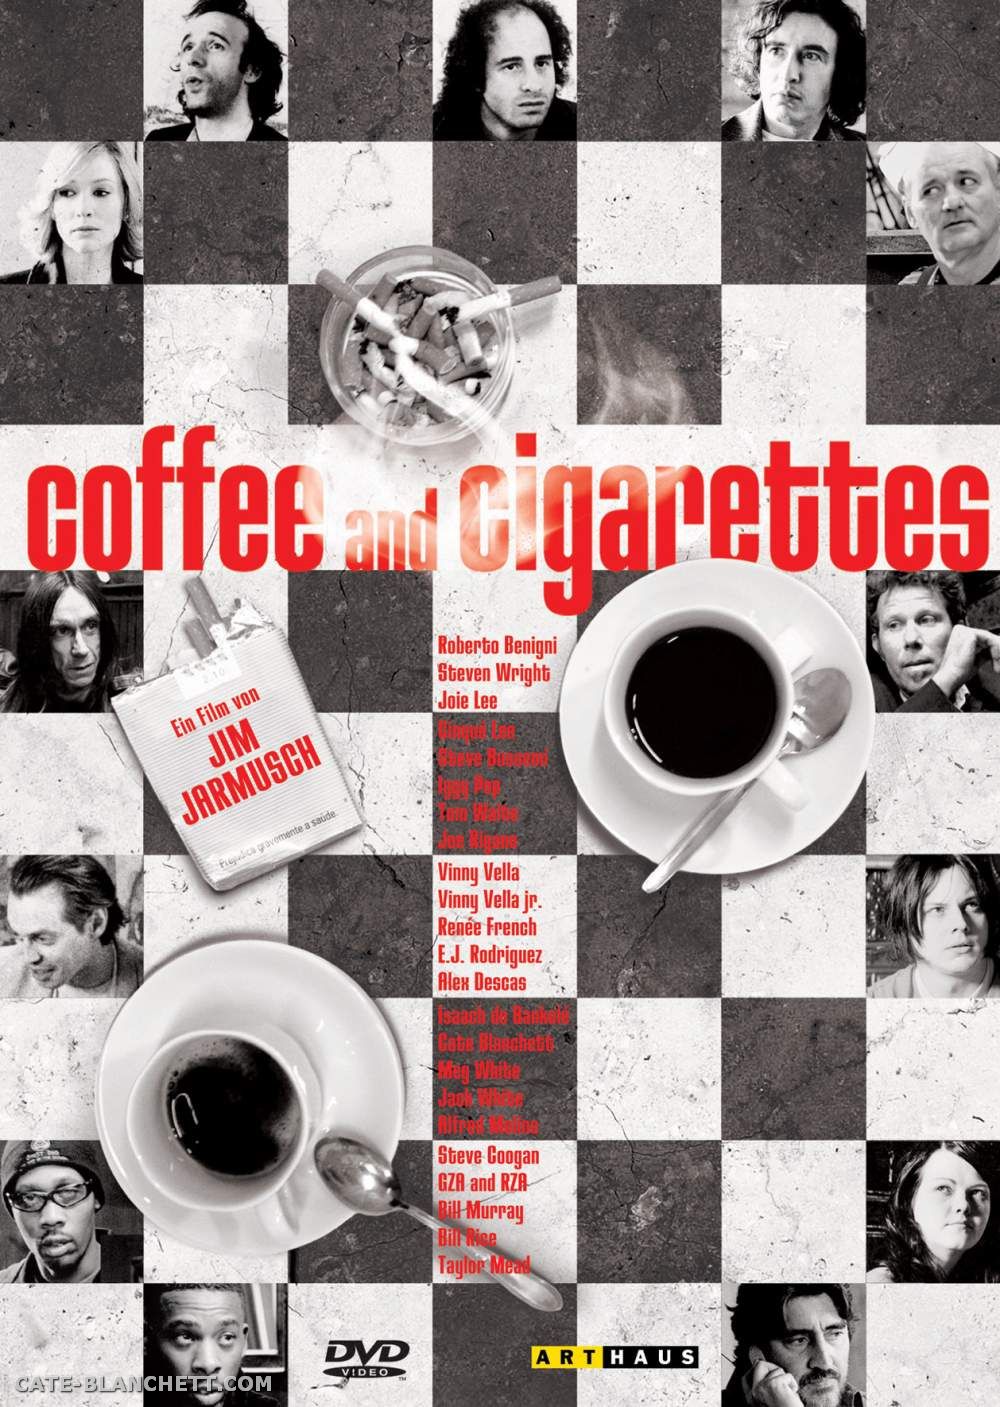 CoffeeandCigarettes-Posters_007.jpg